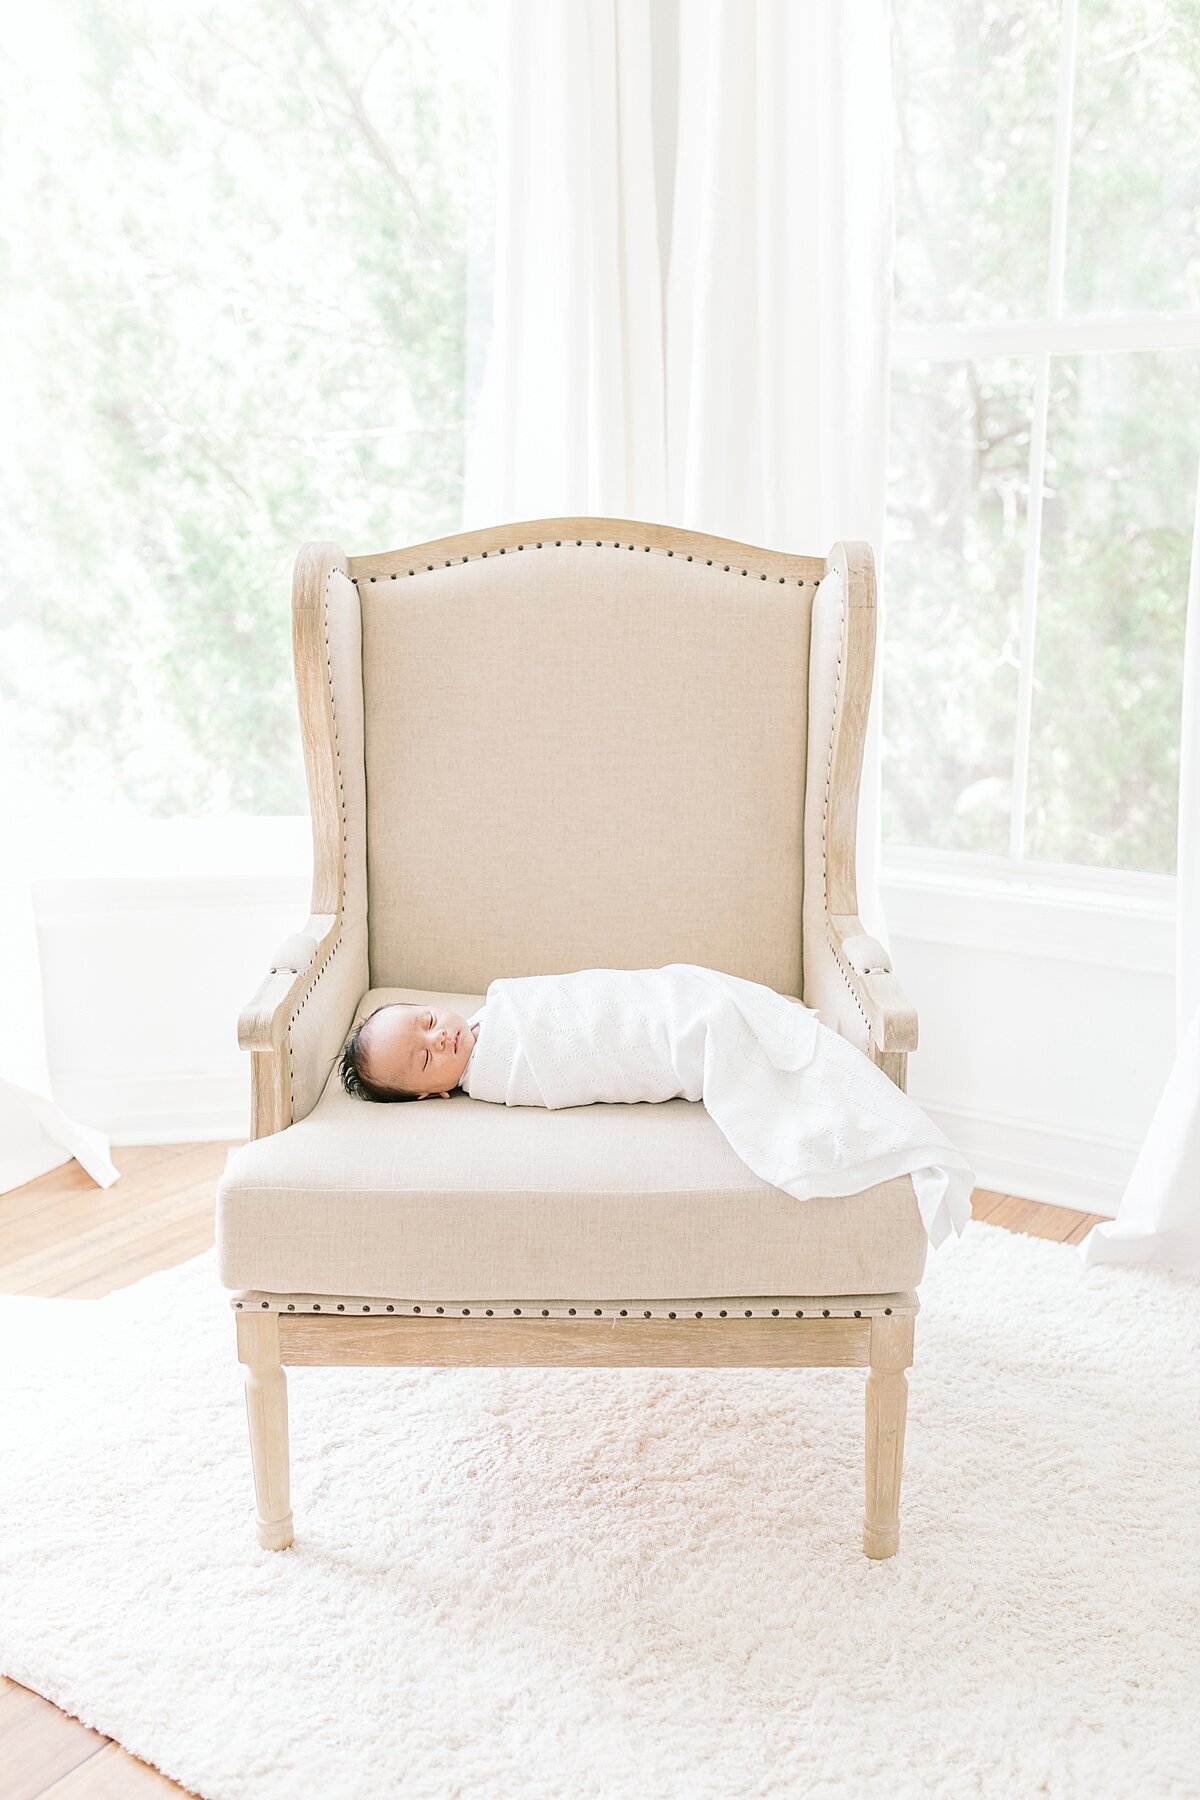 in-home-lifestyle-session-charleston-newborn-photographer-caitlyn-motycka-photography_0024